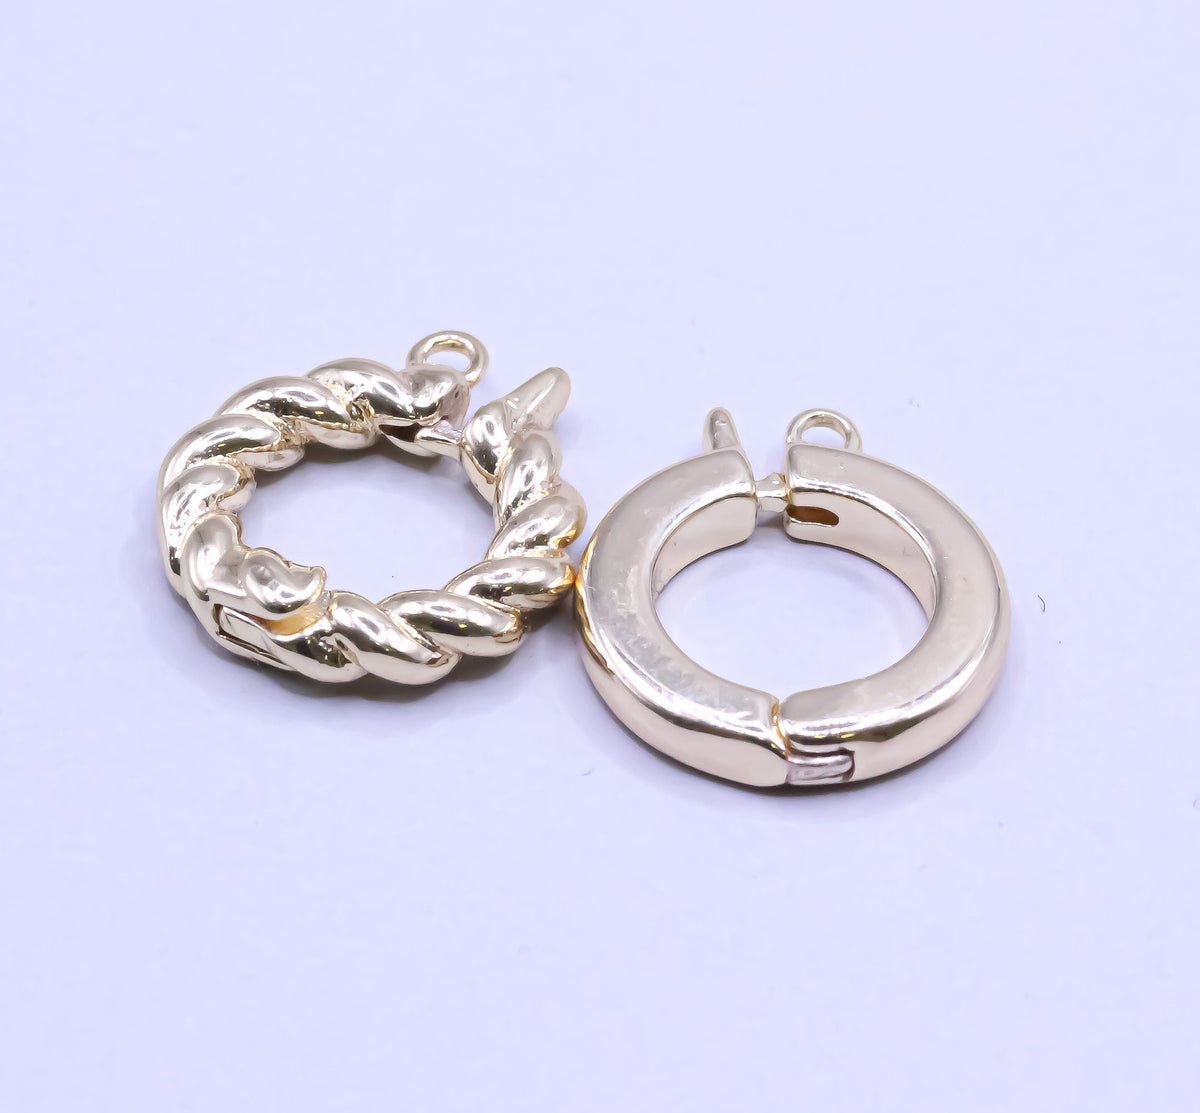 Gold Snap Jewelry Clasp, Clicker Ring Hoop Connector For Jewelry Making,Enhancer Bail For Charm, Slider Charm Holder, PBC-81, PBC-82